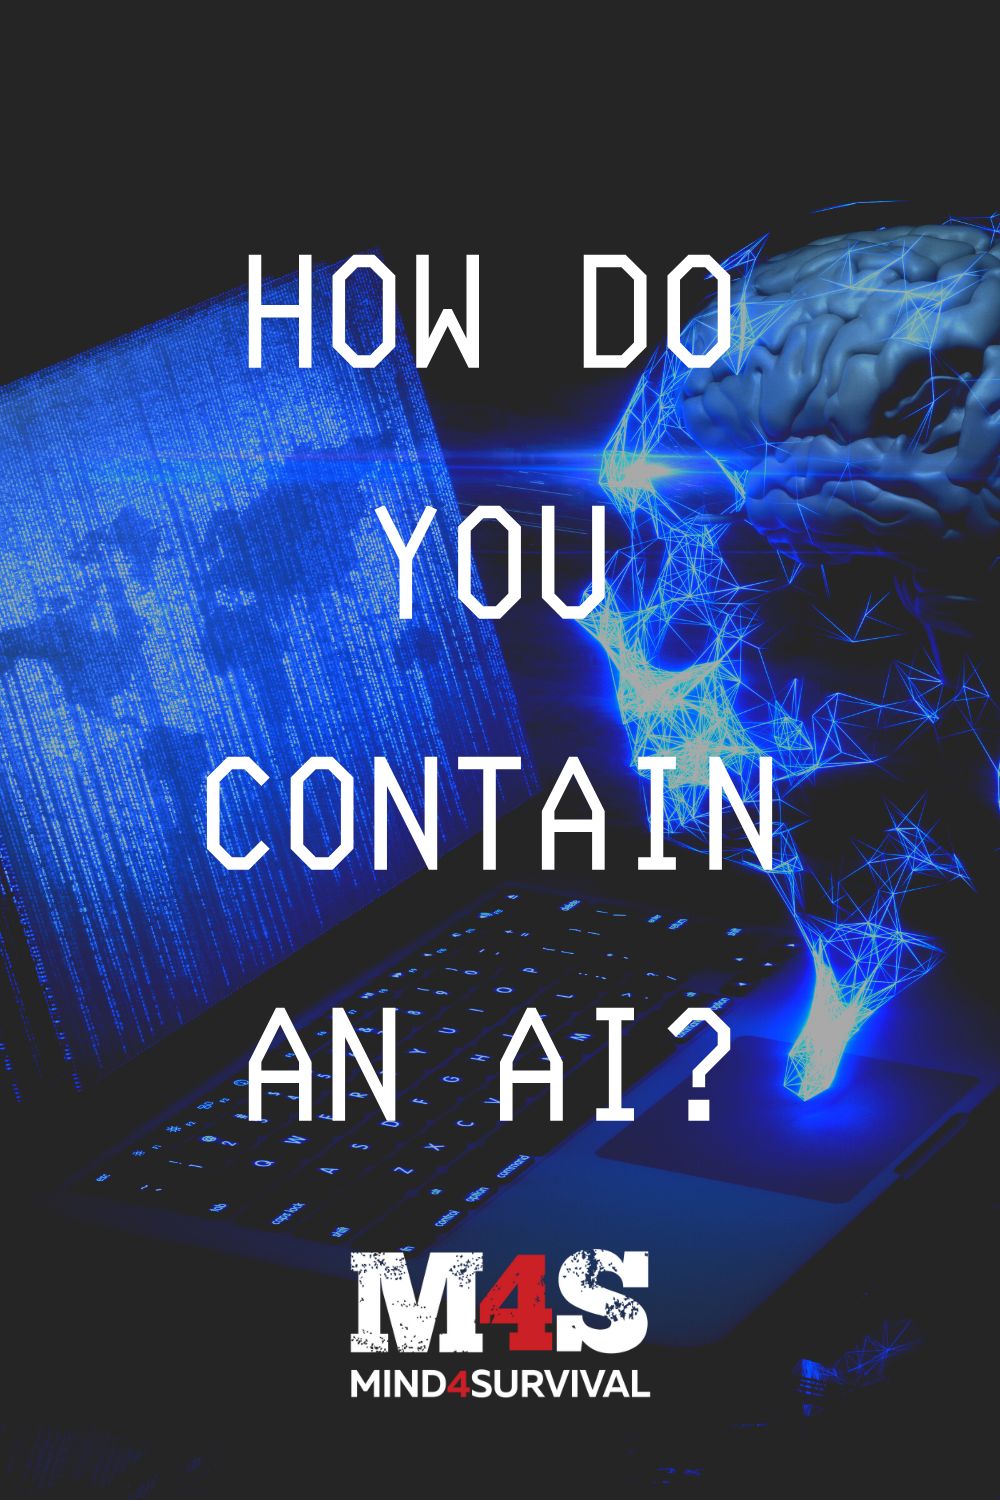 How Do You Contain an Artificial Intelligence?